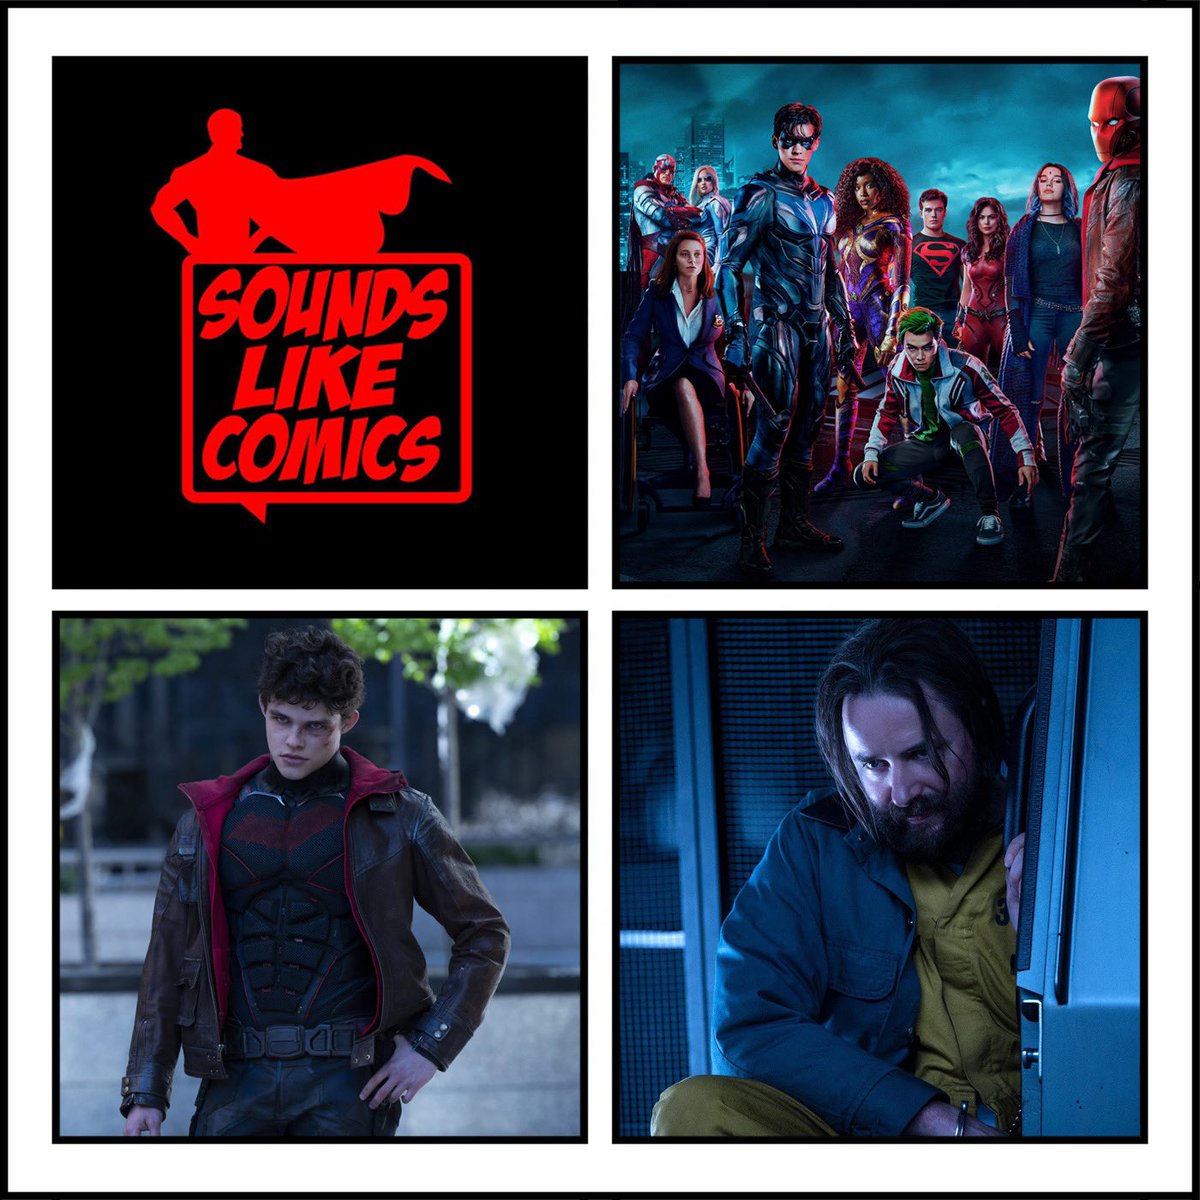 The gritty, edgy version of the not-quite-teen Titans.

Listen HERE: soundcloud.app.goo.gl/T1gVJQEb52r4BX…

#TVSeries #Review #DCTitans   #BrentonThwaites #AnnaDiop #TeaganCroft #RyanPotter #ConorLeslie #CurranWalters   #SavannahWelch #VincentKartheiser #PodernFamily #PodcastHQ #FilmTwitter